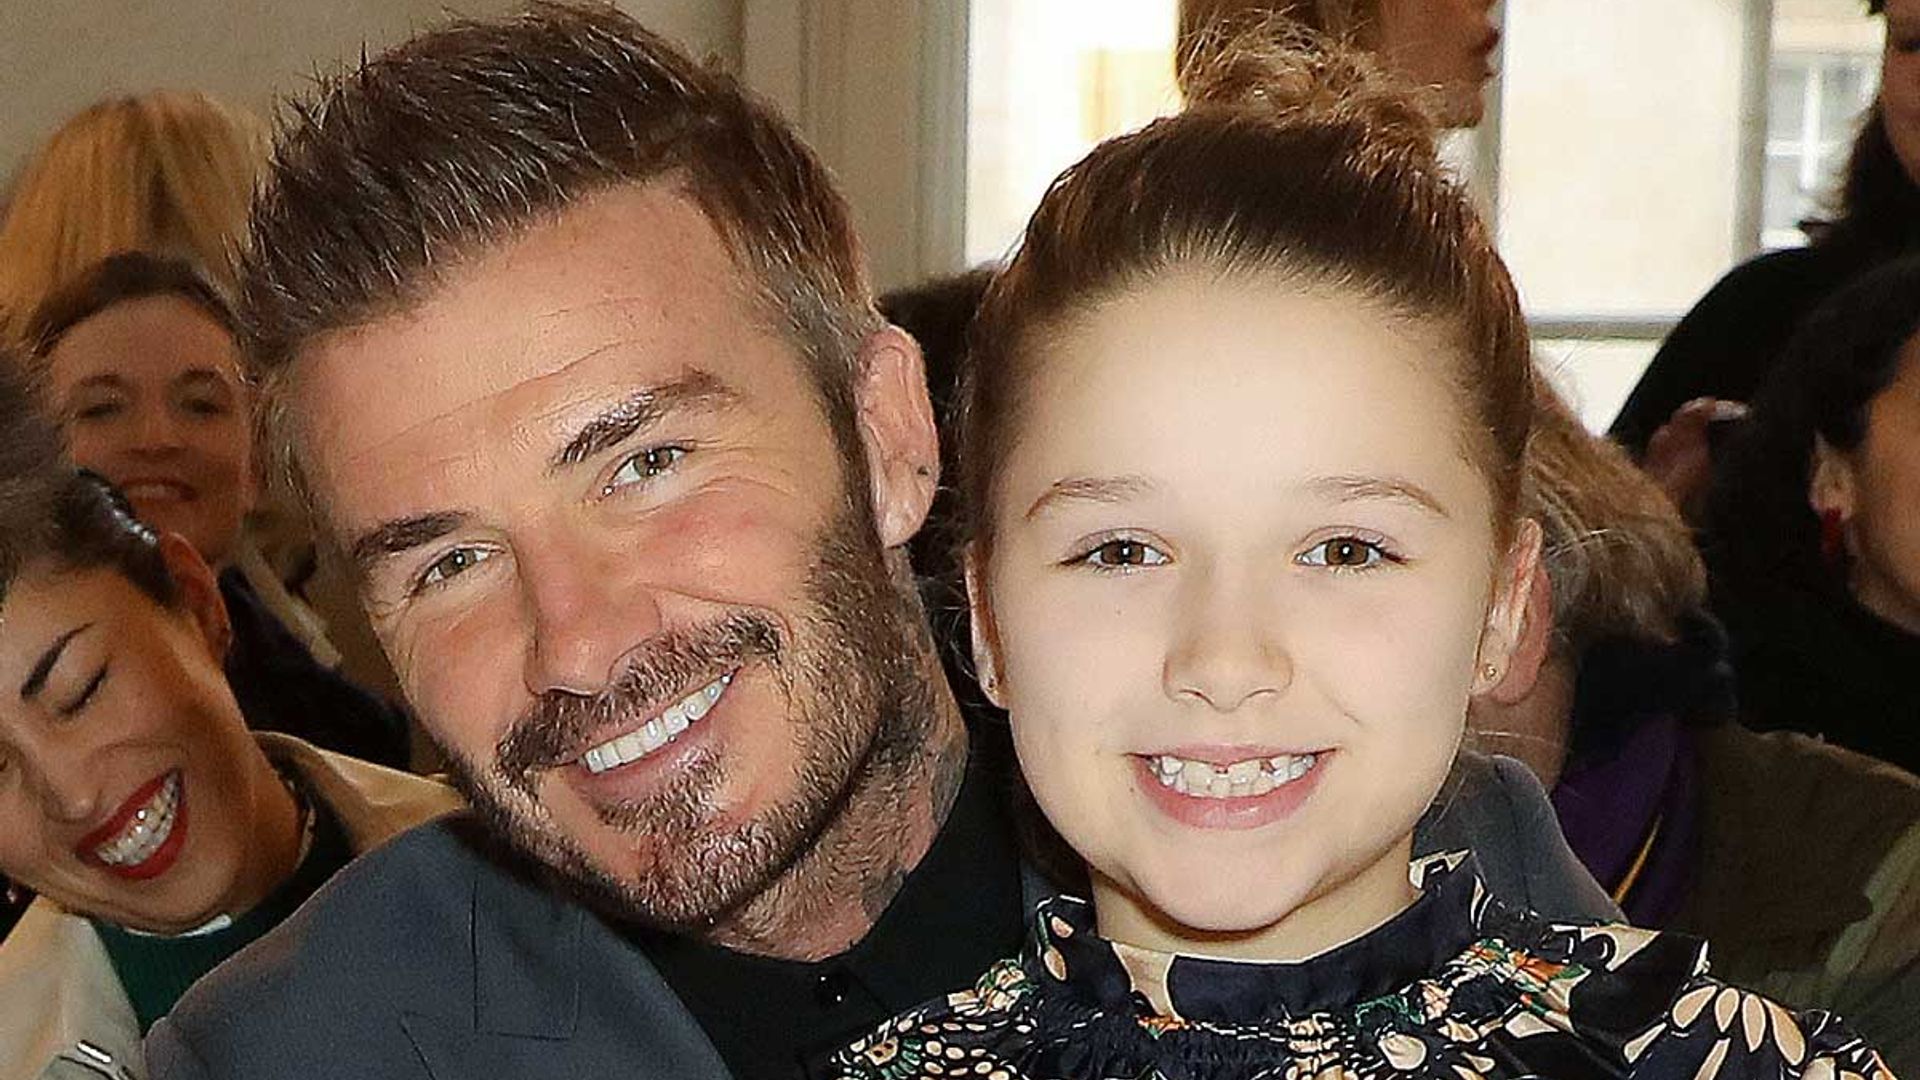 David Beckham's special packed lunch for daughter Harper is so precious